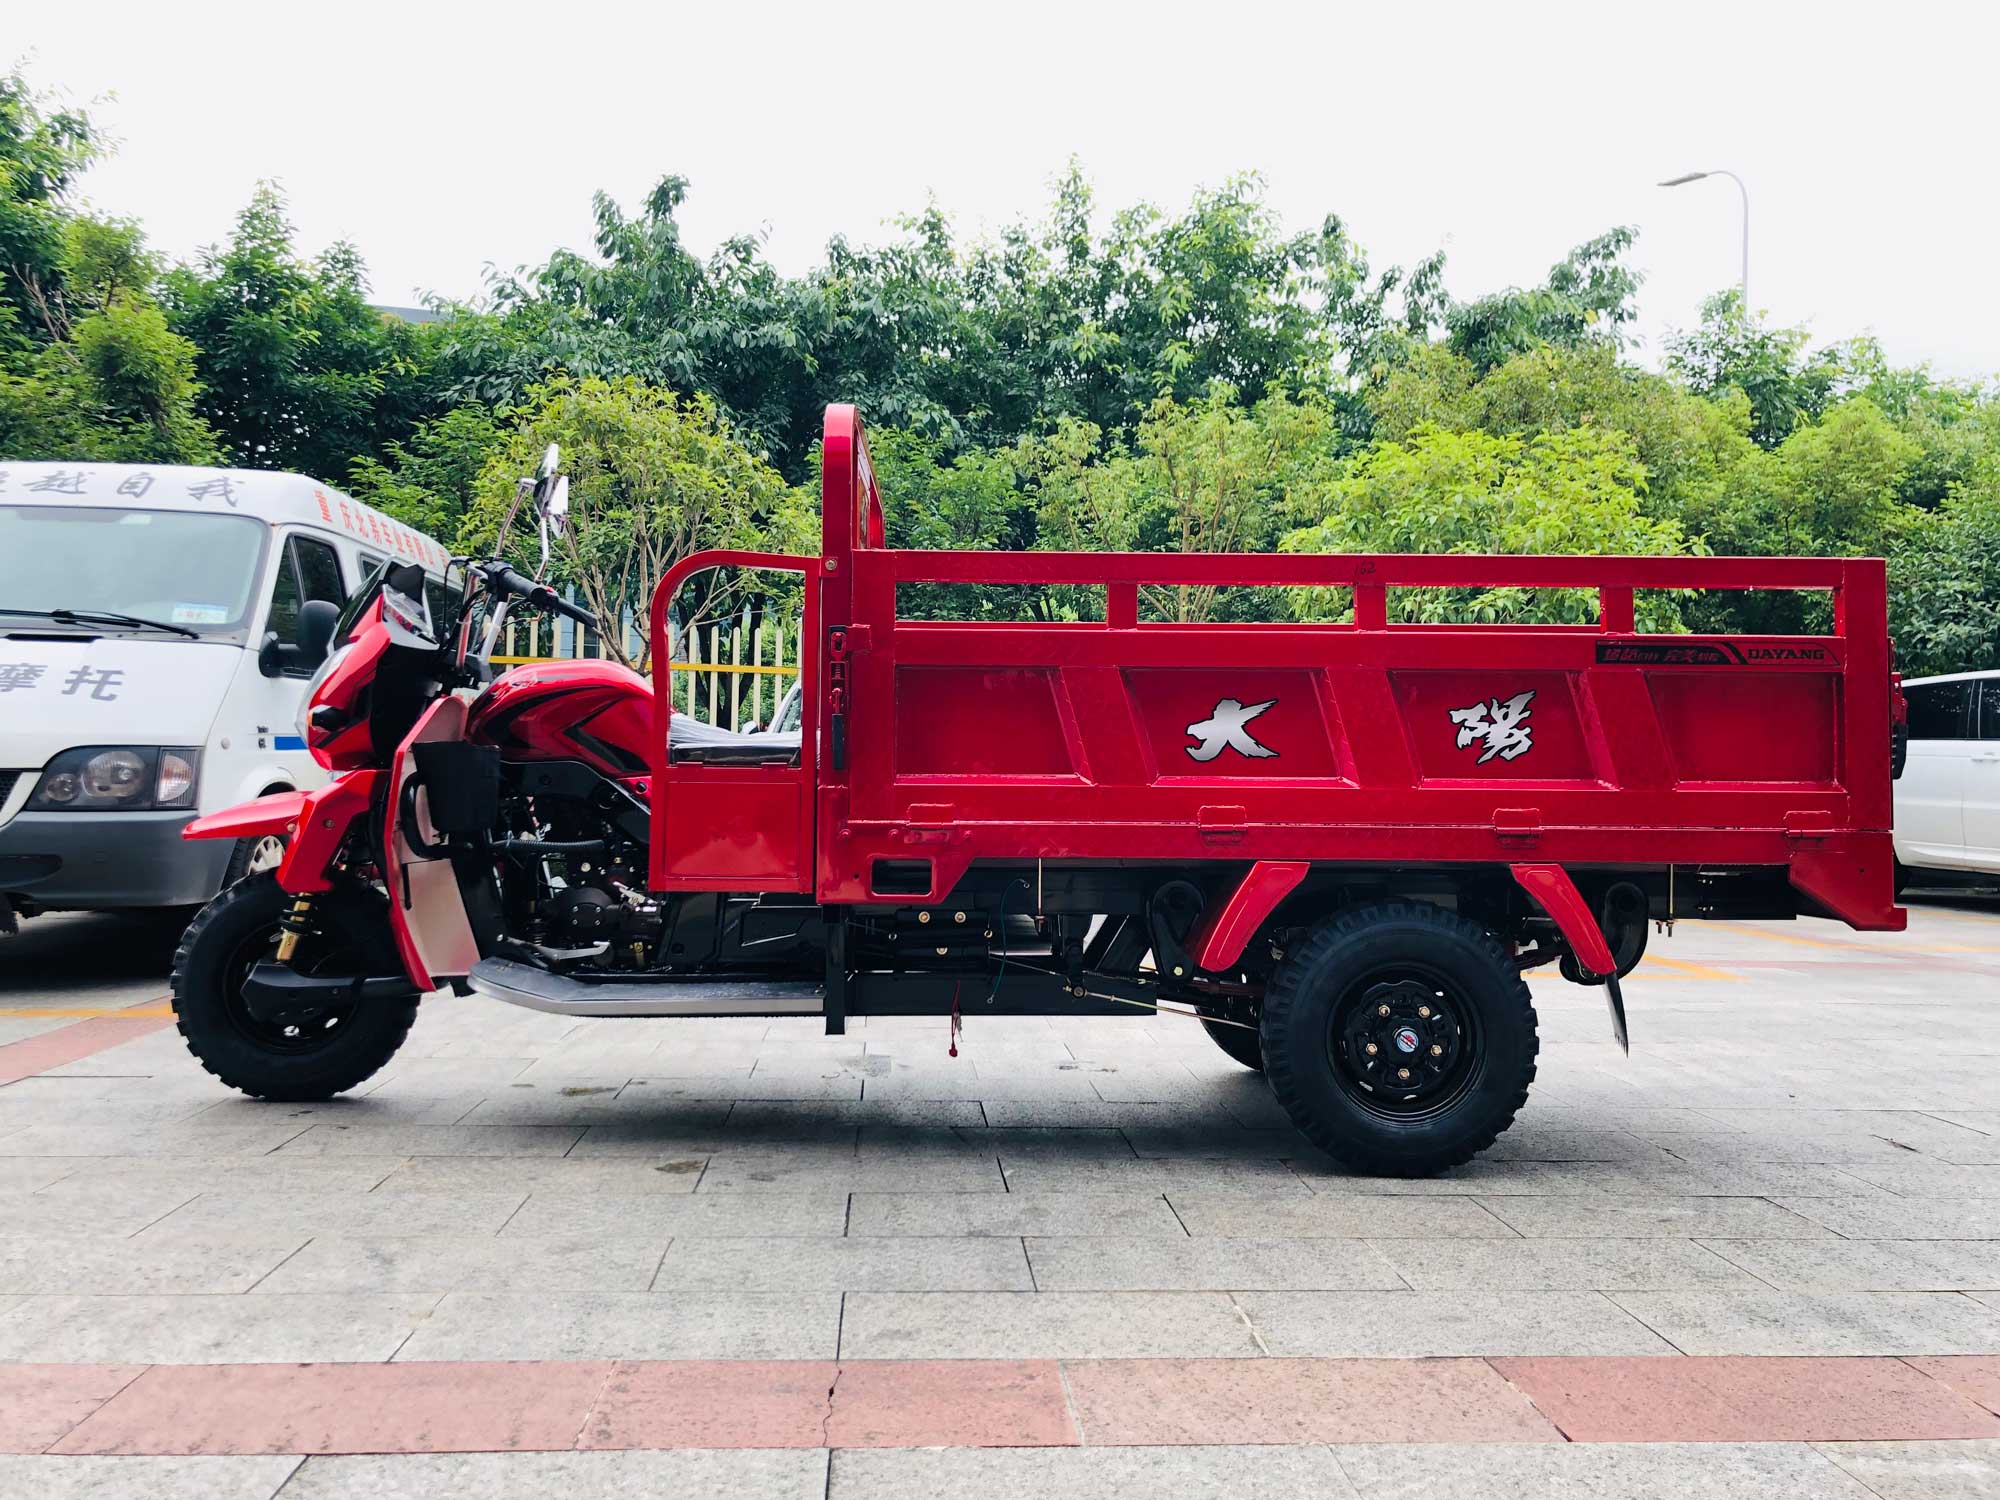 DY-R1 China hot selling cargo tricycle models with 250cc/300cc engine